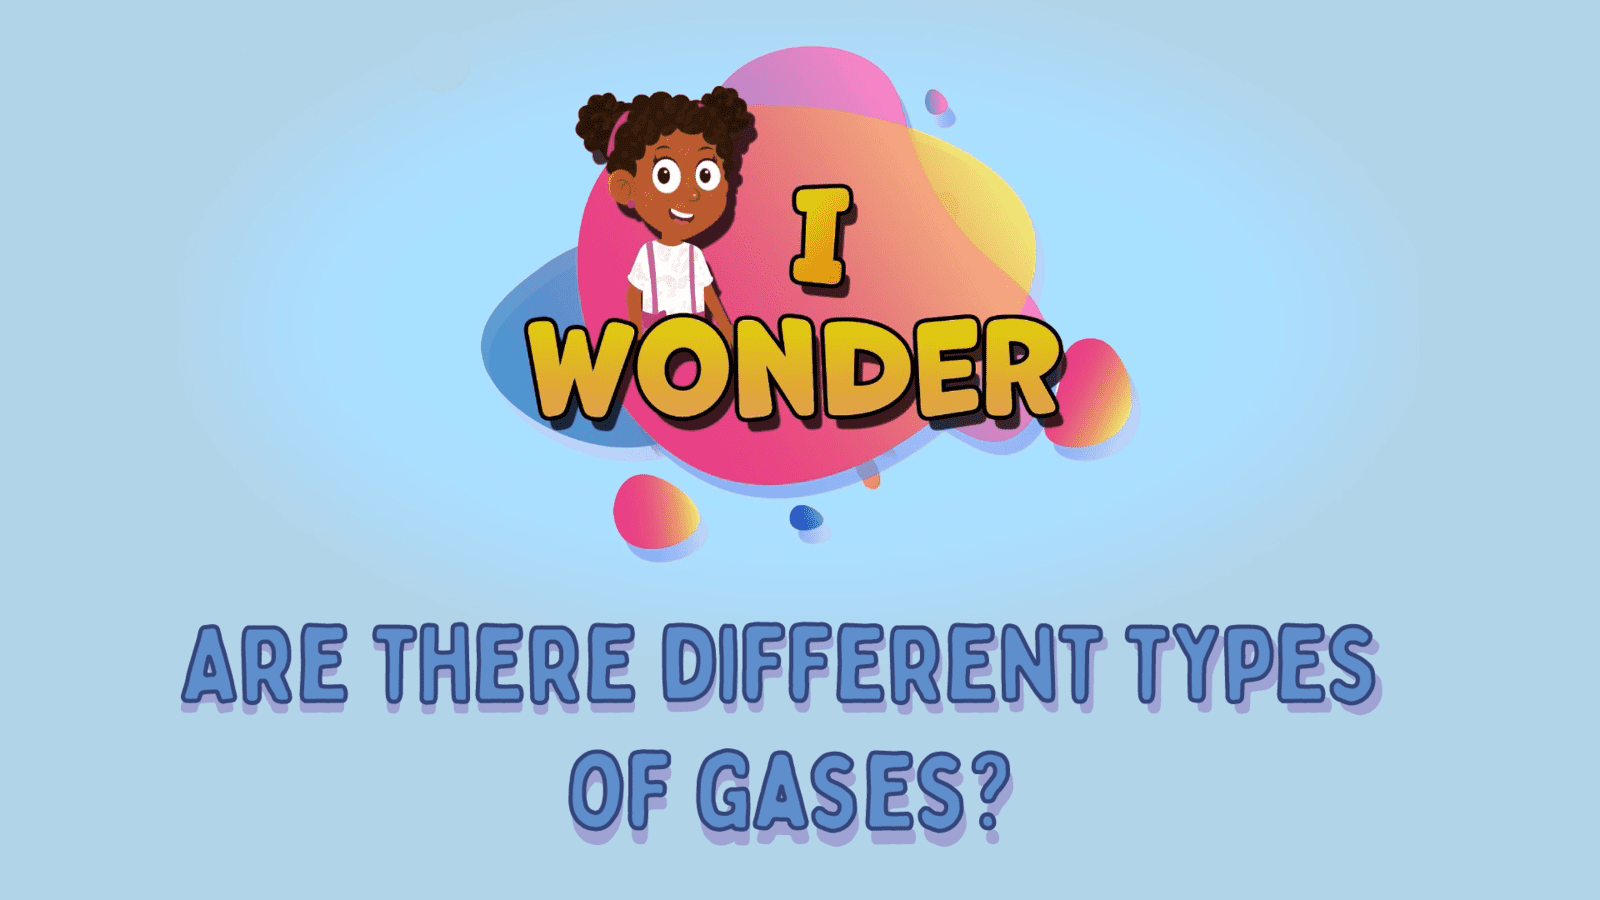 Are There Different Types Of Gases?